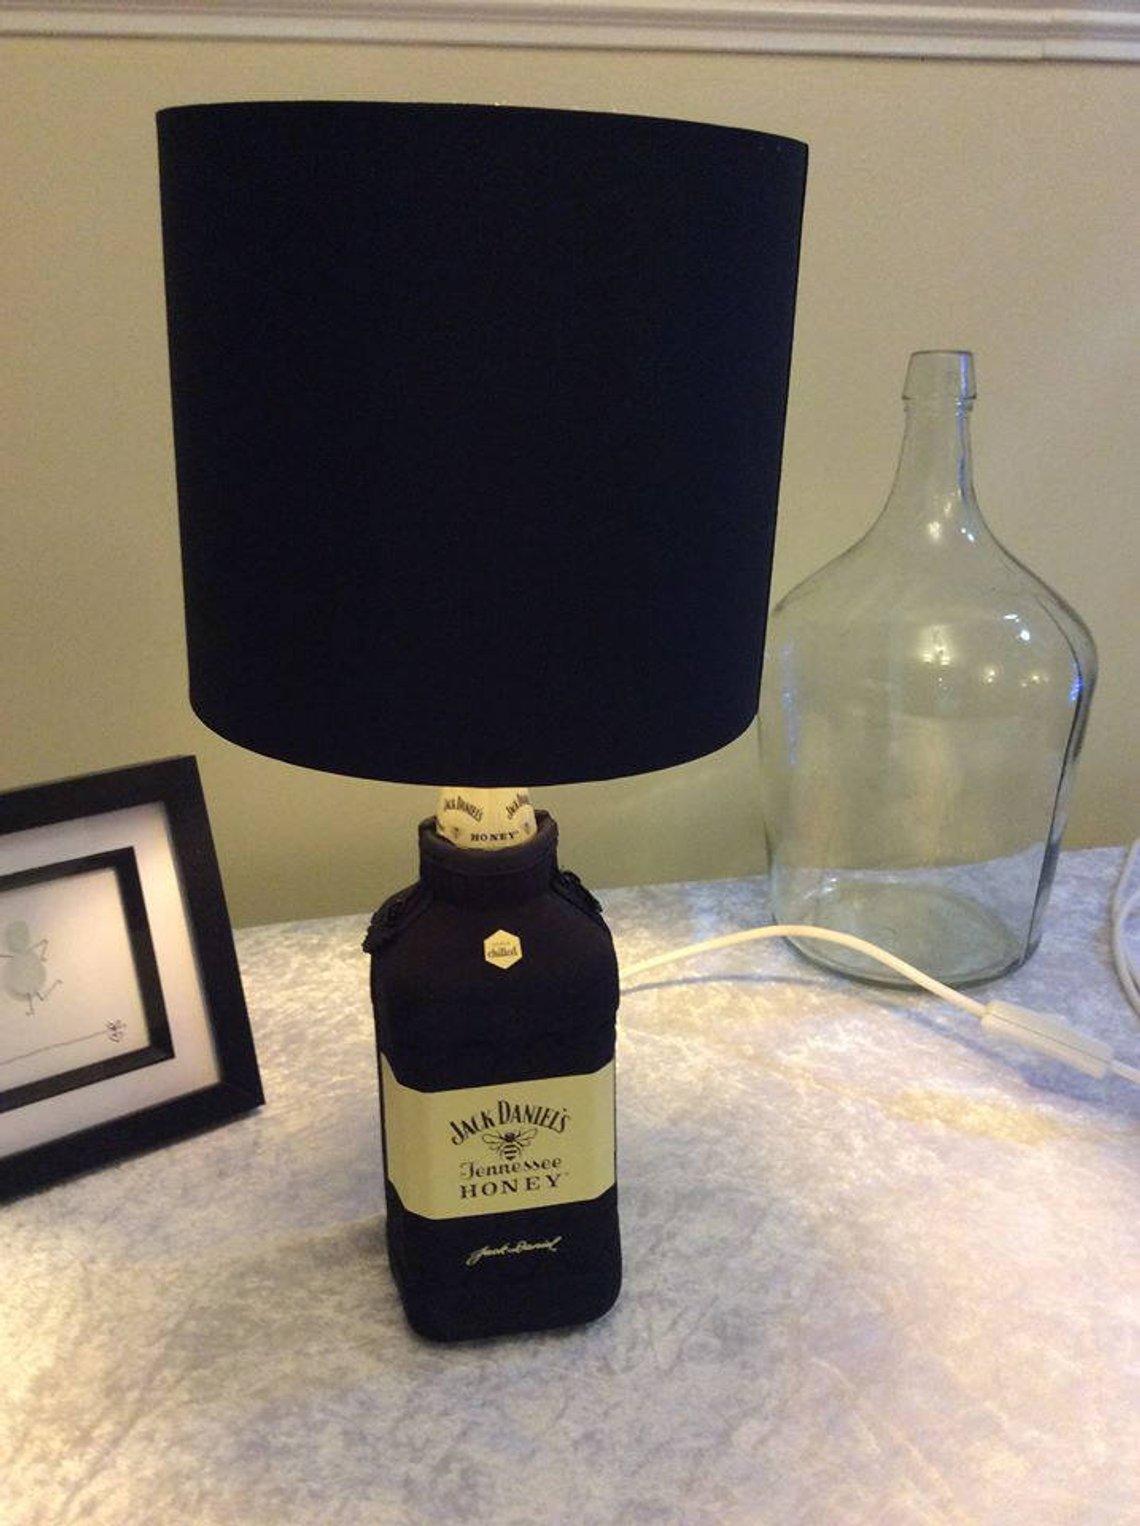 Limited Edition Jack Daniel’s Tennessee Honey Whiskey Bottle Lamp with fitted Neoprene Chiller Jacket showing Bee Zipper Free Shipping UK